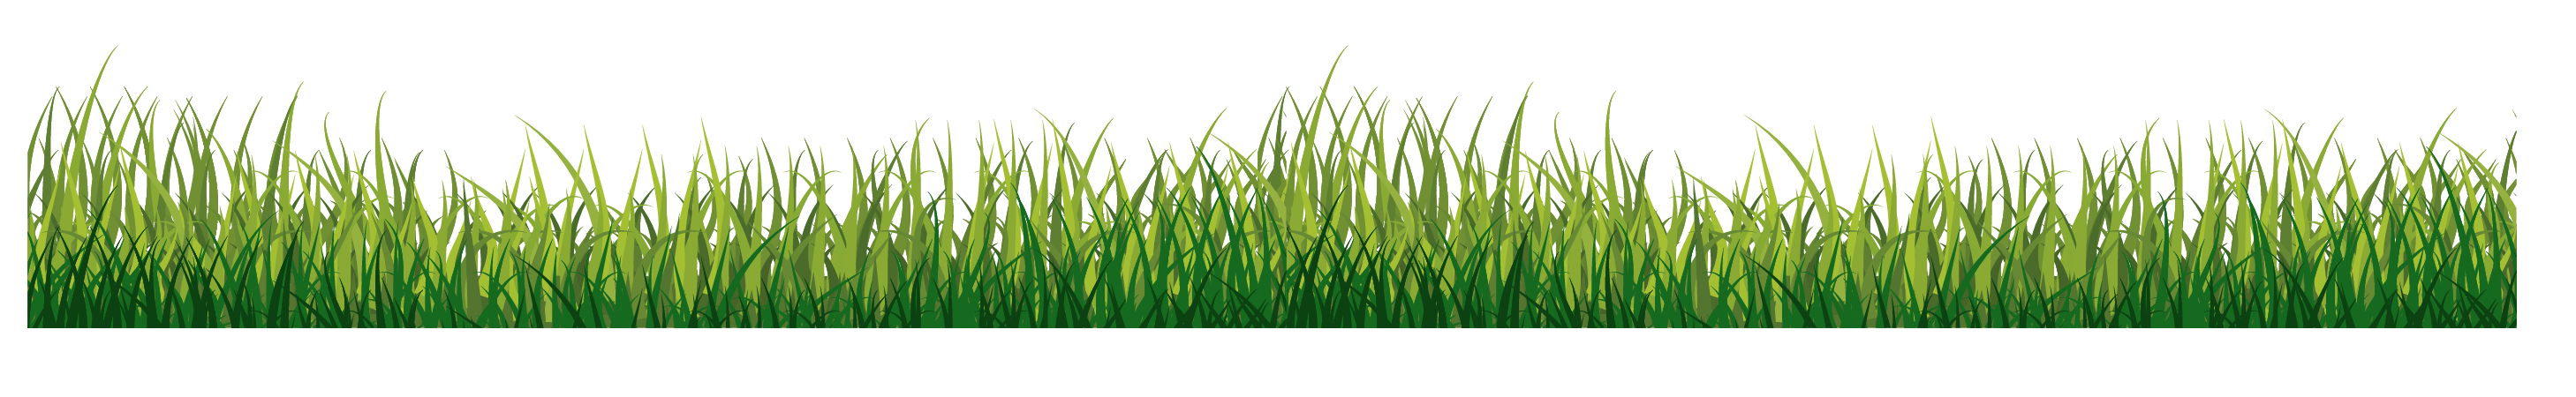 Grasses Grass Green Free Photo PNG Clipart